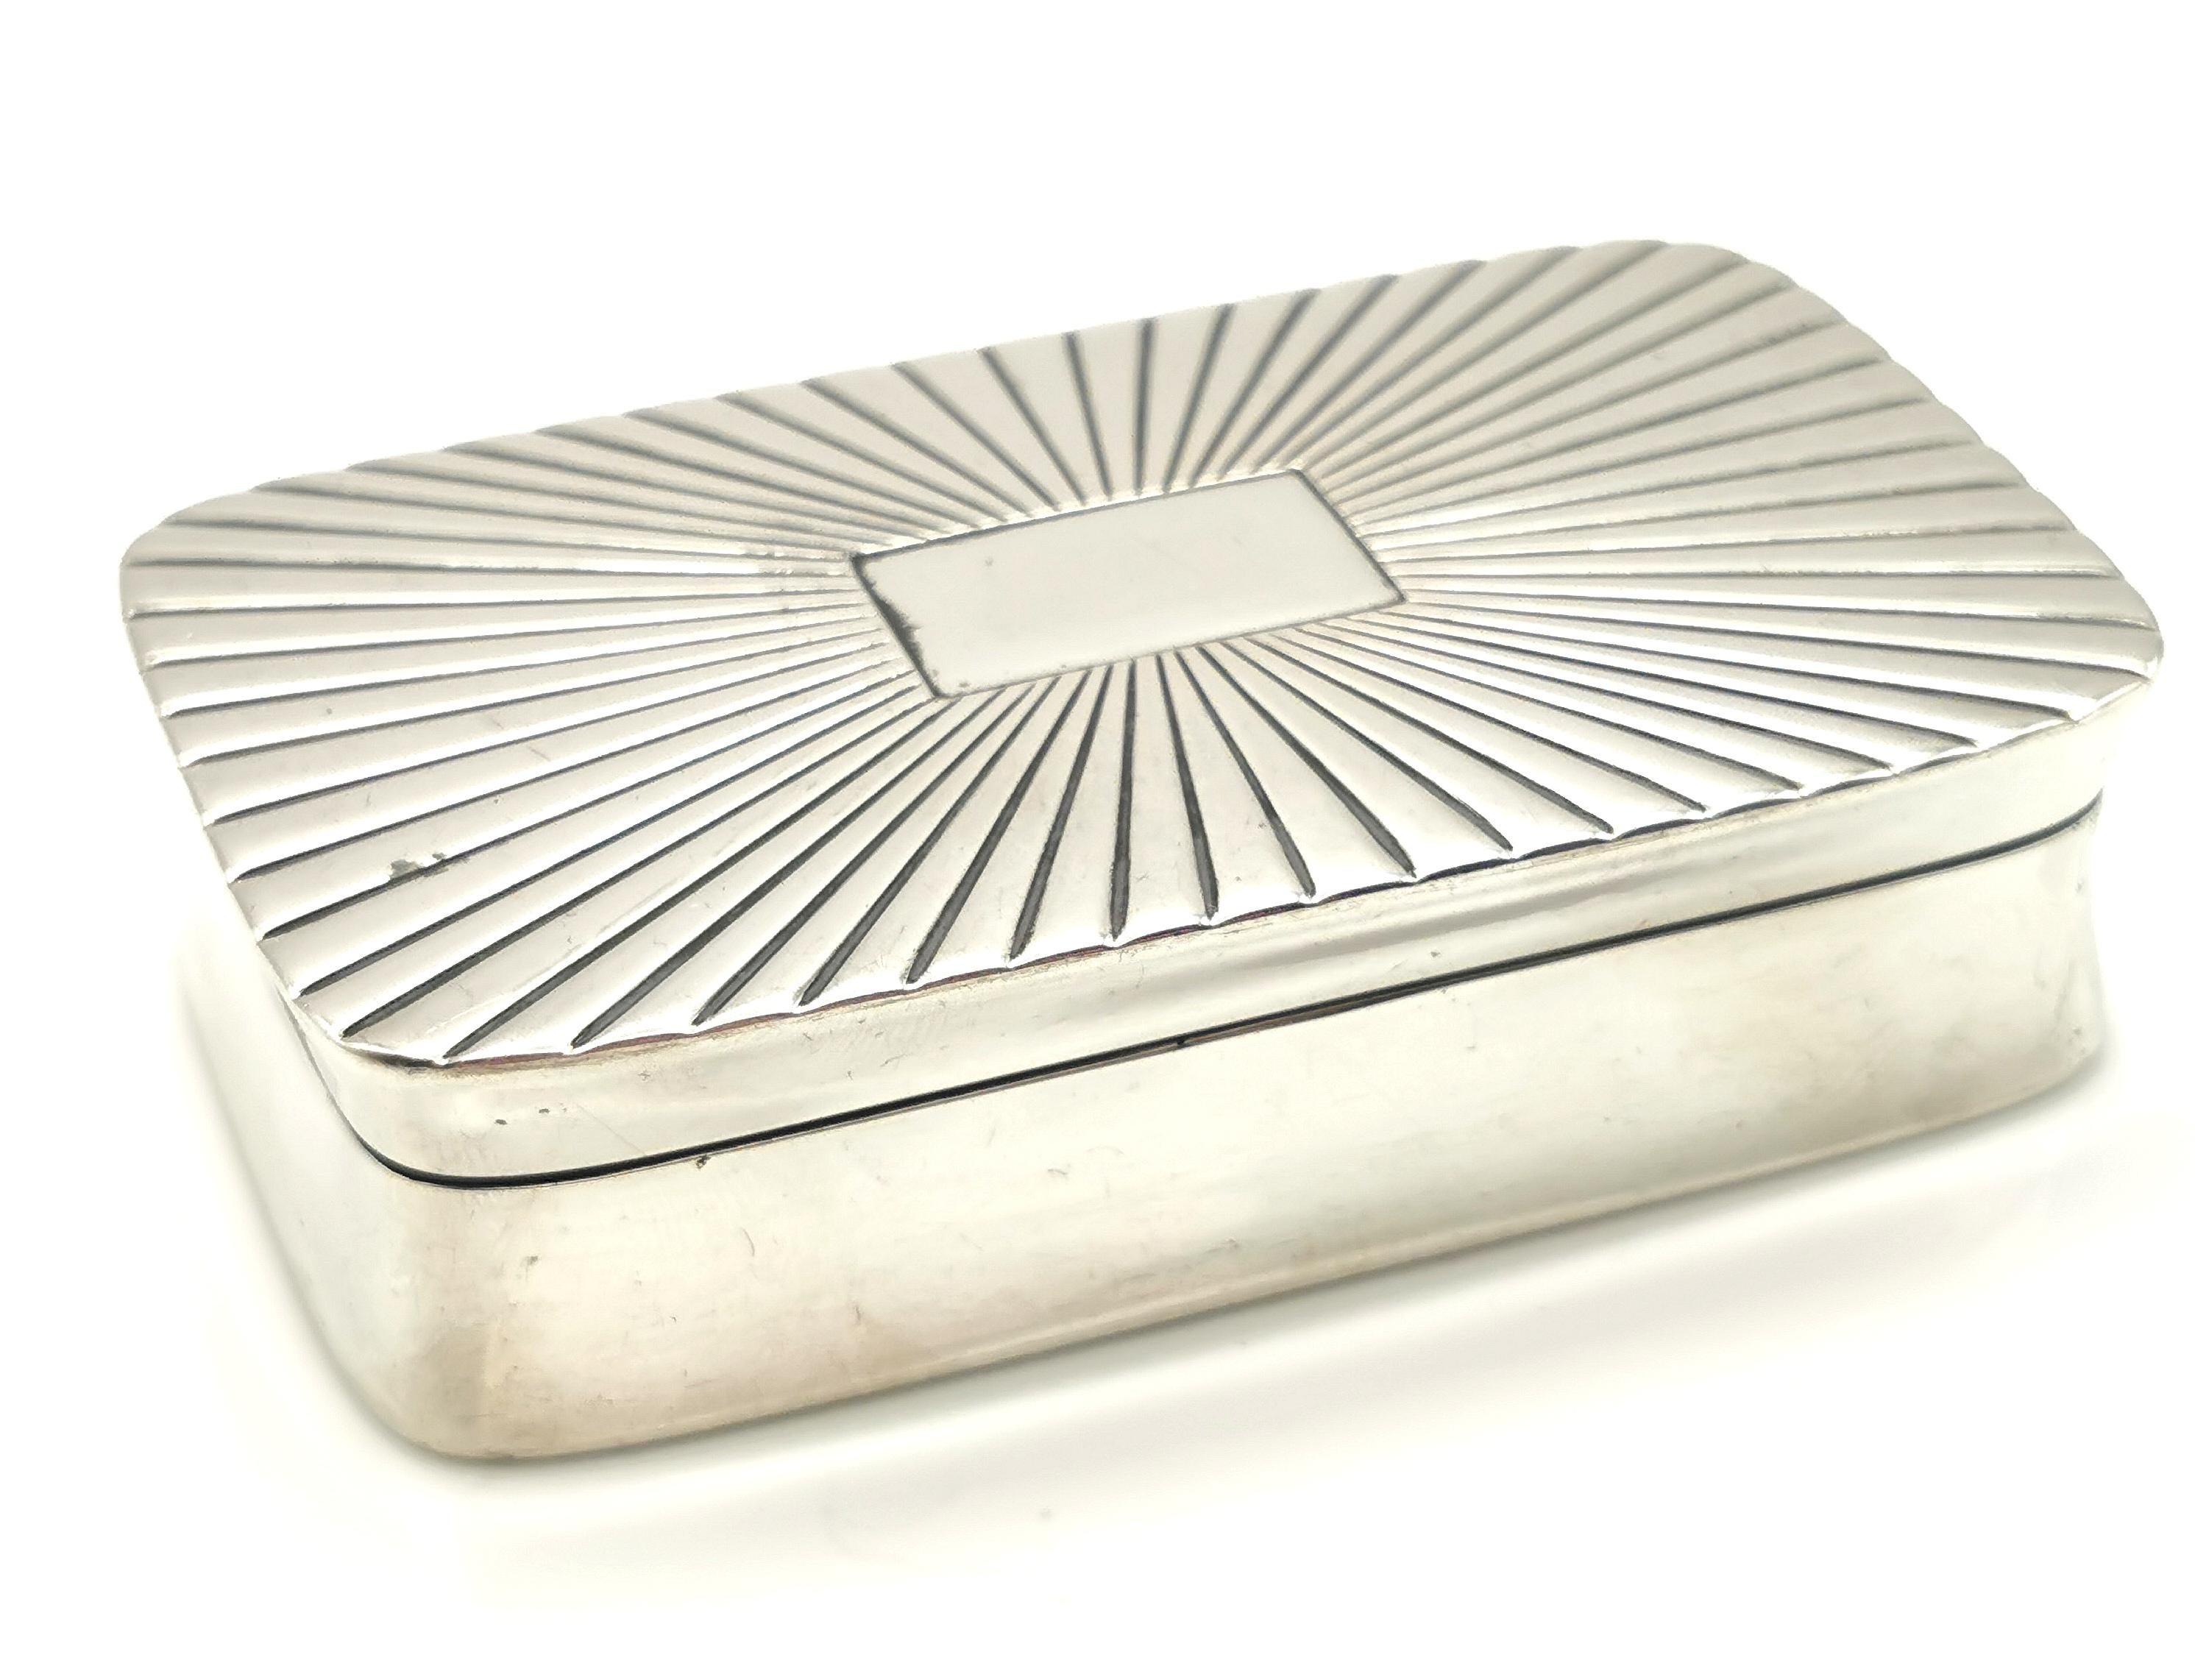 A fine antique 19th century Dutch silver tobacco or snuff box.

It is a larger box than a standard snuff so could have been used as a tobacco box or a larger snuff box.

It is a rectangular shape with slightly canted sides and a decorative sun ray